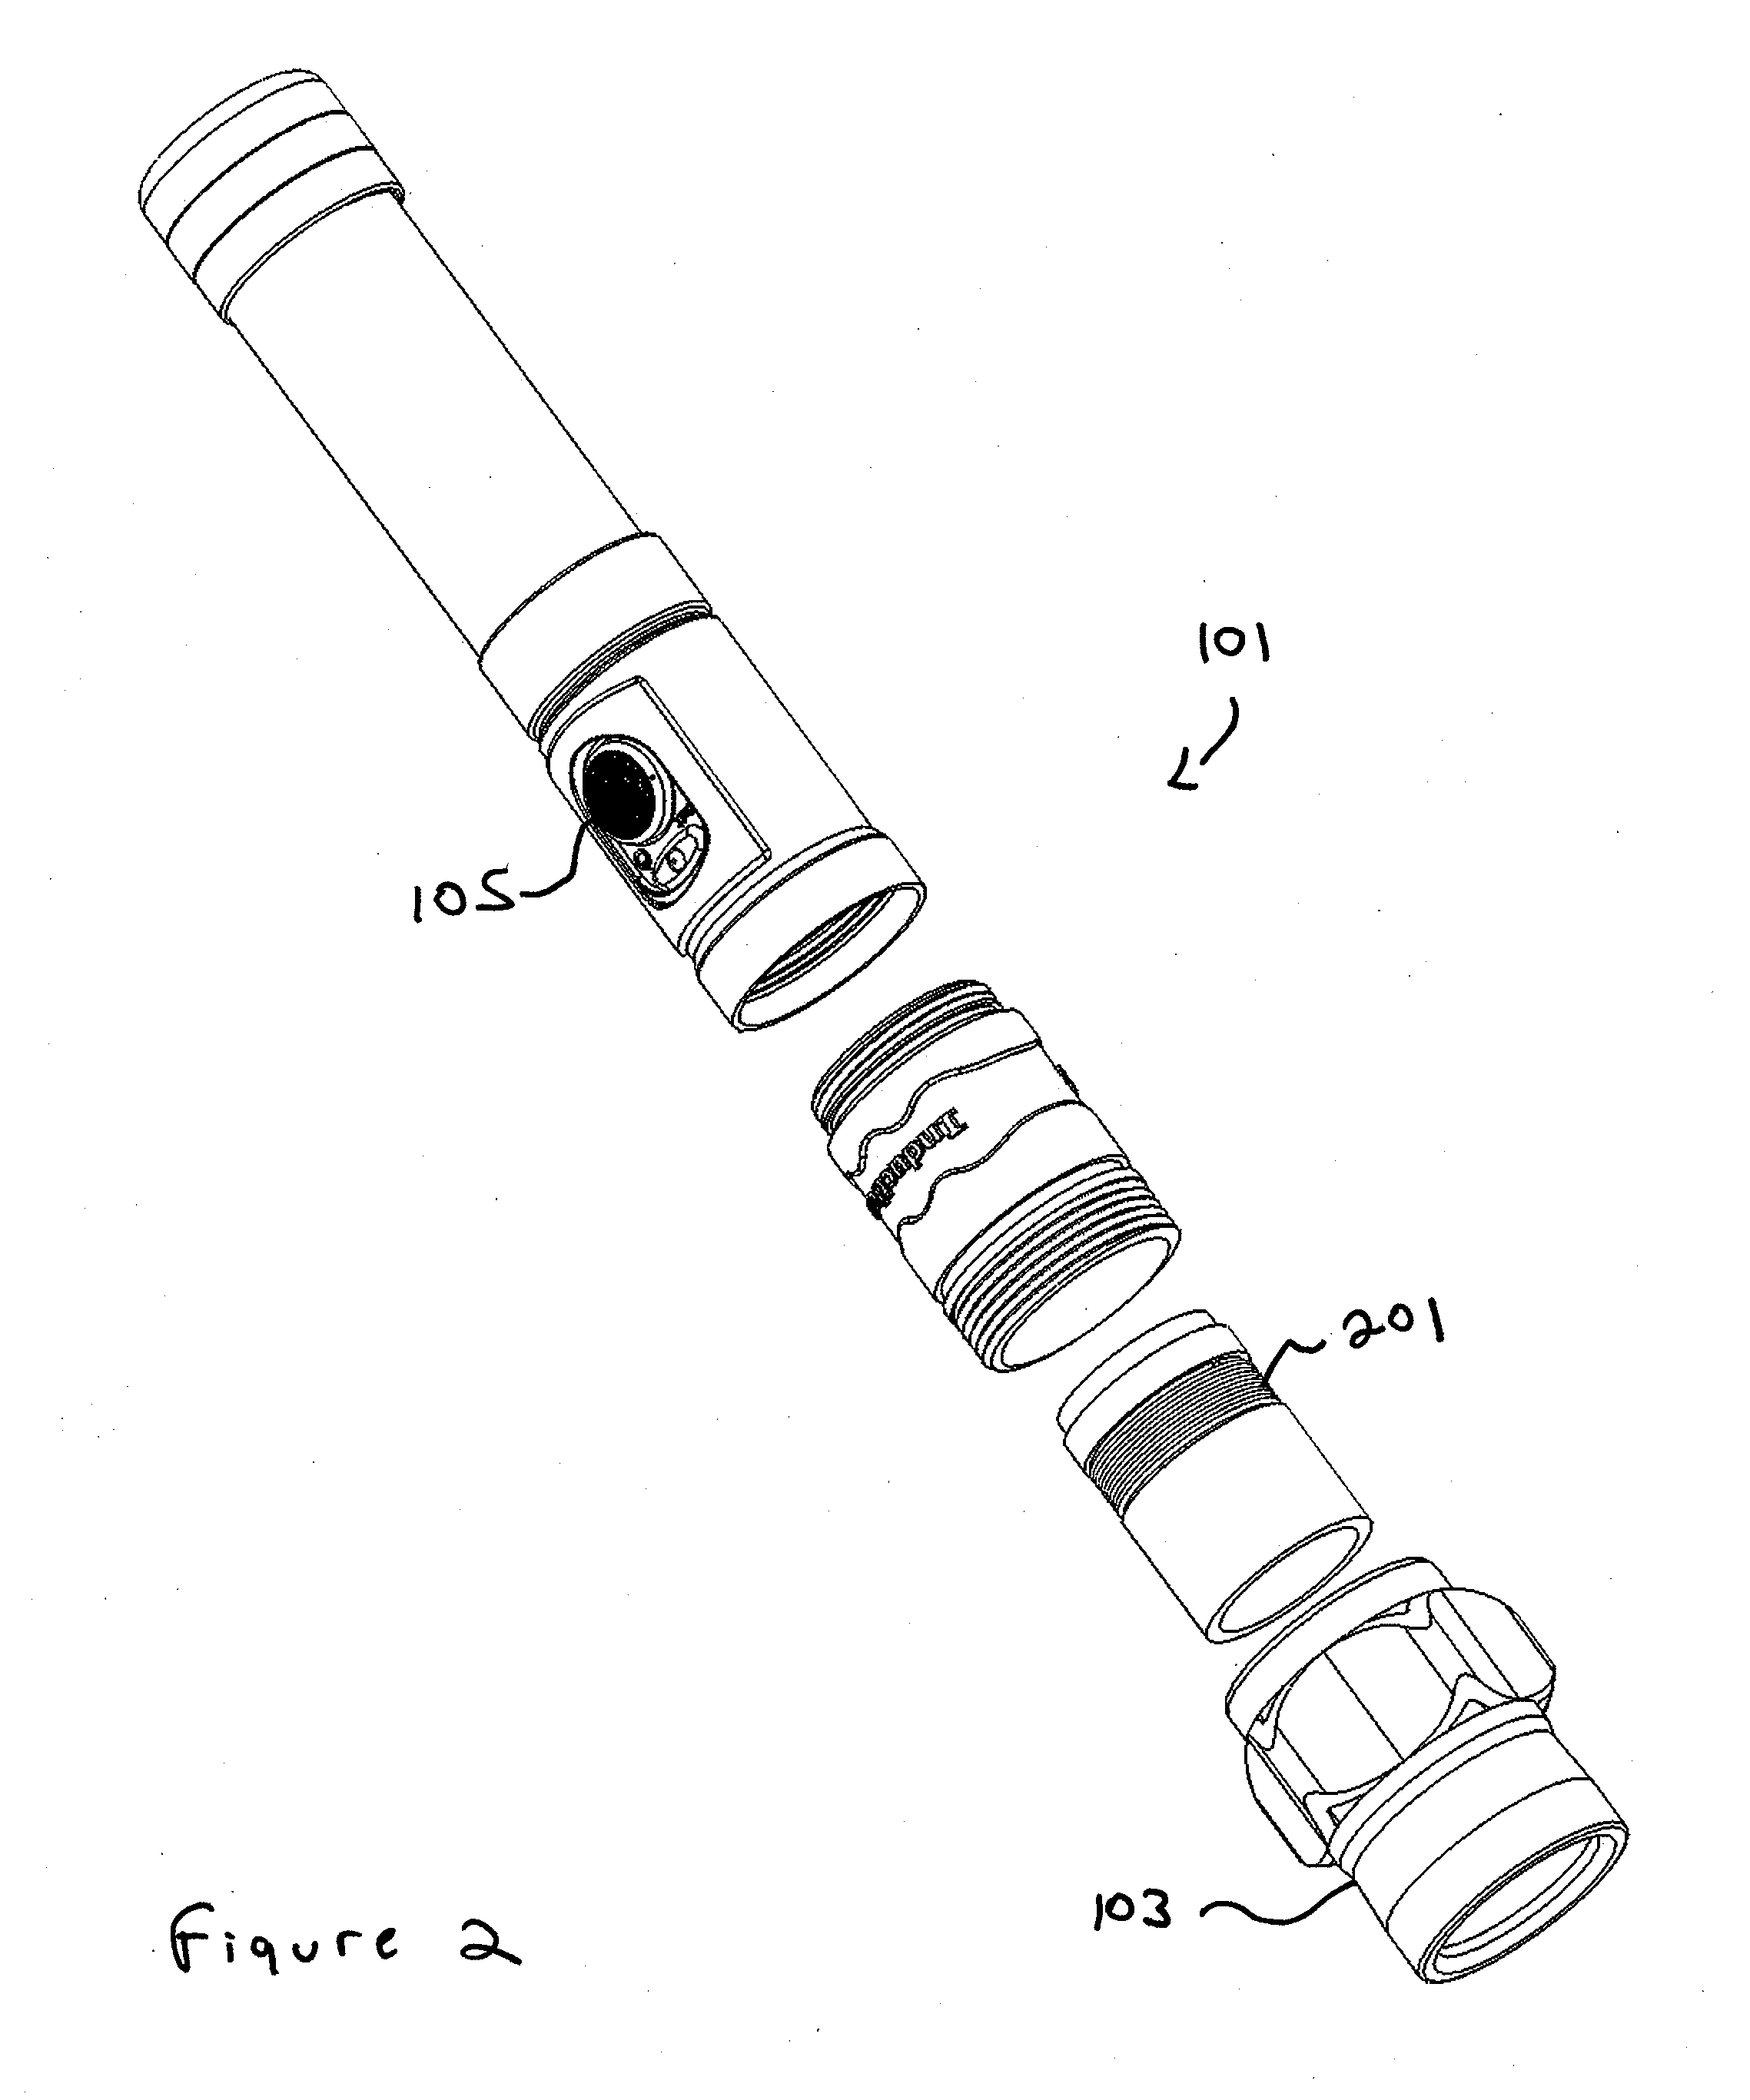 Inductive Flashlight Charging System with Concentric Coils